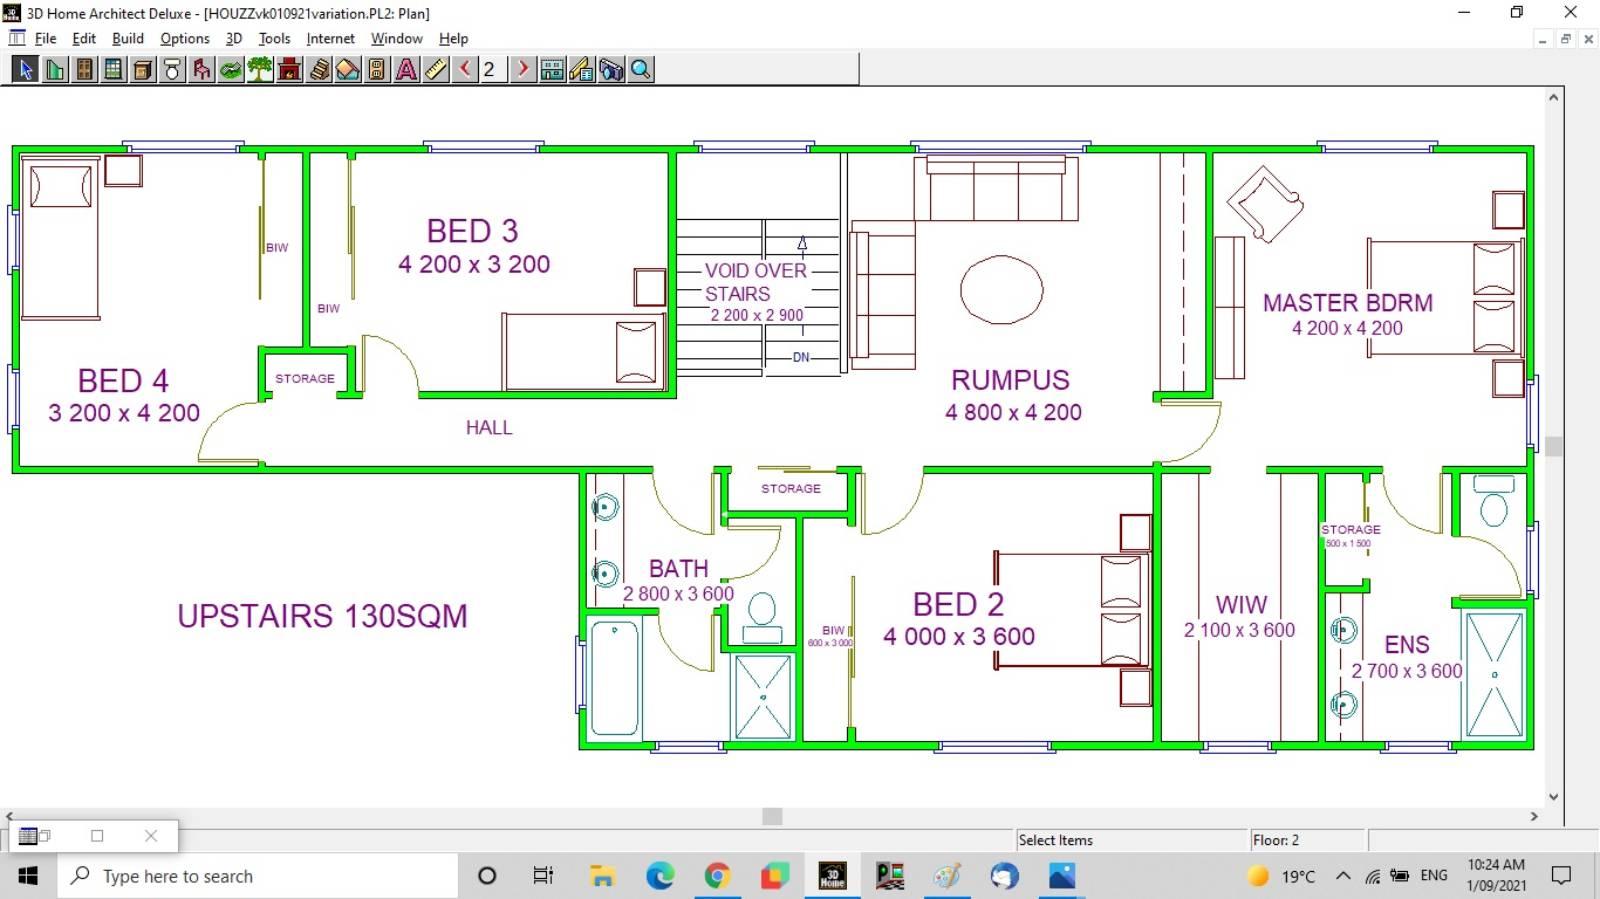 View: Advice on Floor Plan for New House